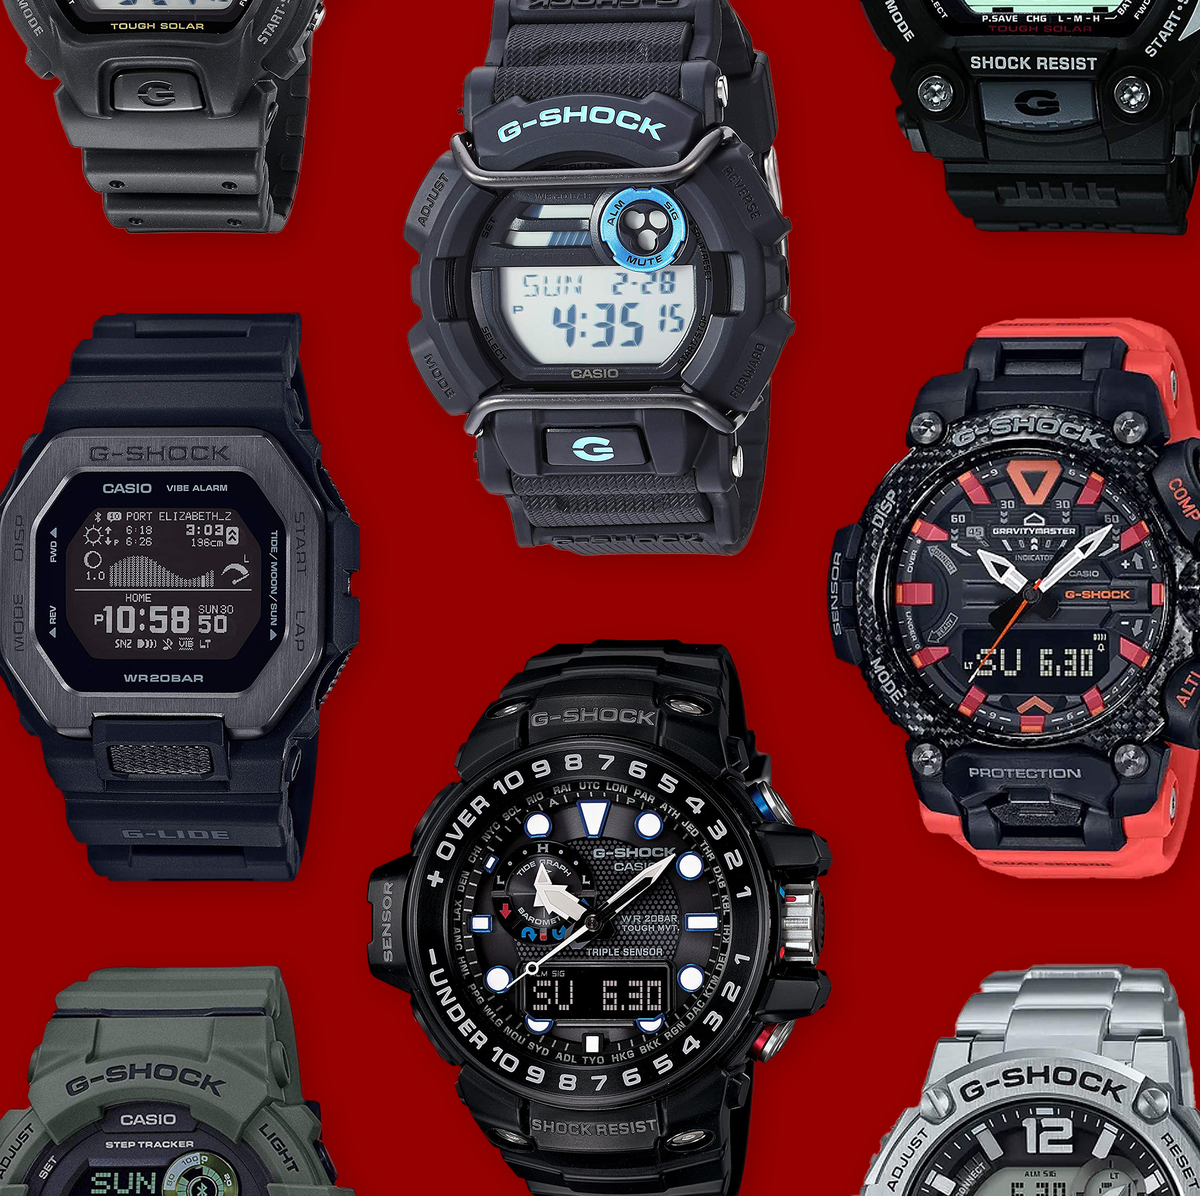 havik China machine The Complete Buying Guide to Casio G-Shock Watches